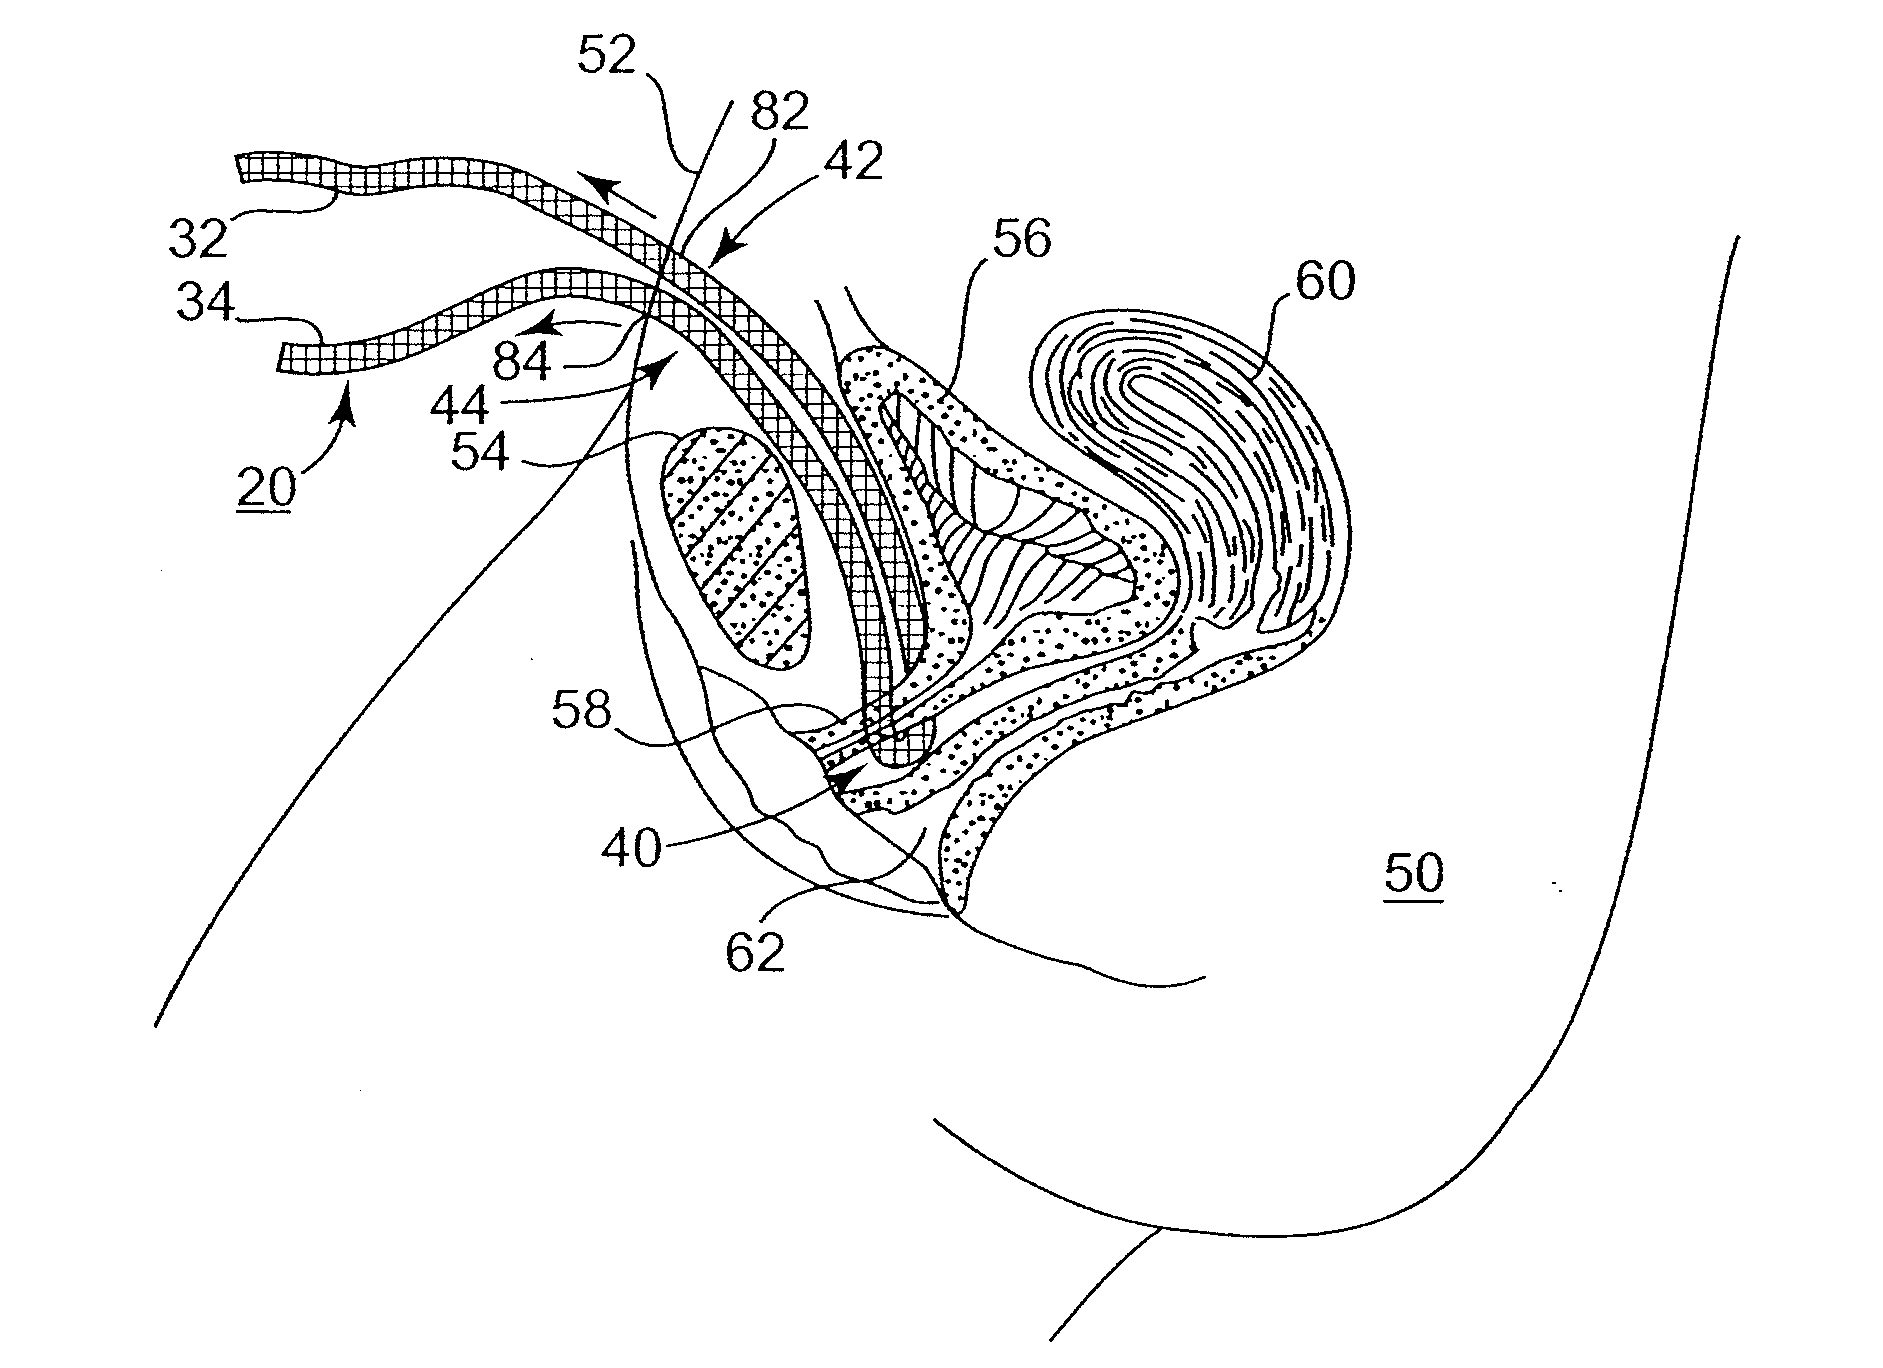 Adjustable Sling and Method of Treating Pelvic Conditions